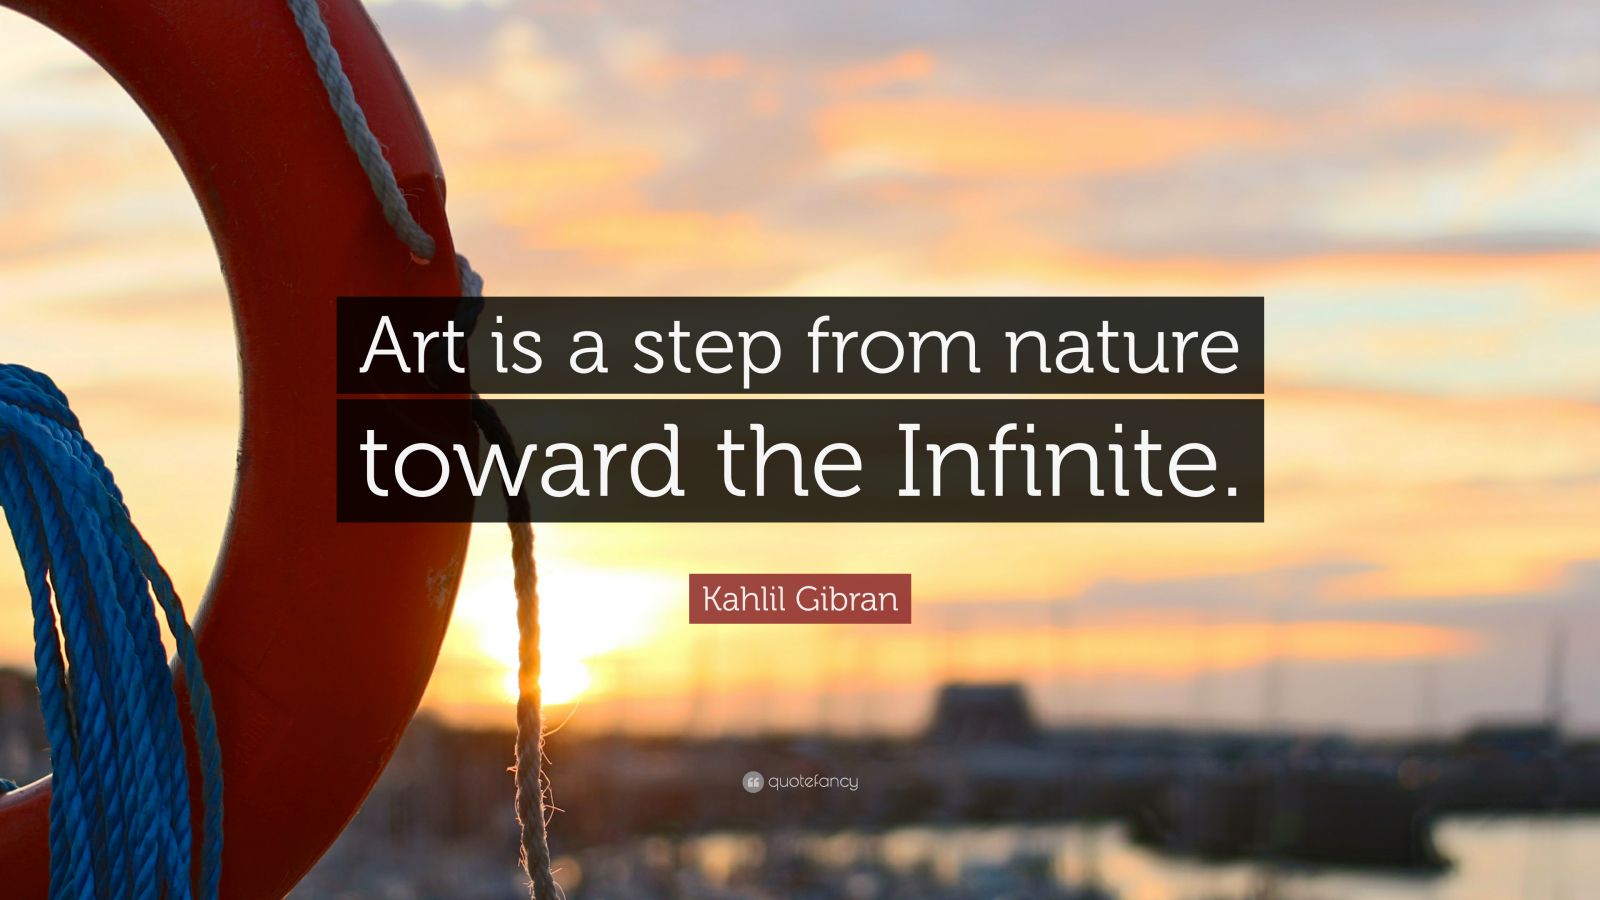 Kahlil Gibran Quote: “Art is a step from nature toward the Infinite.”